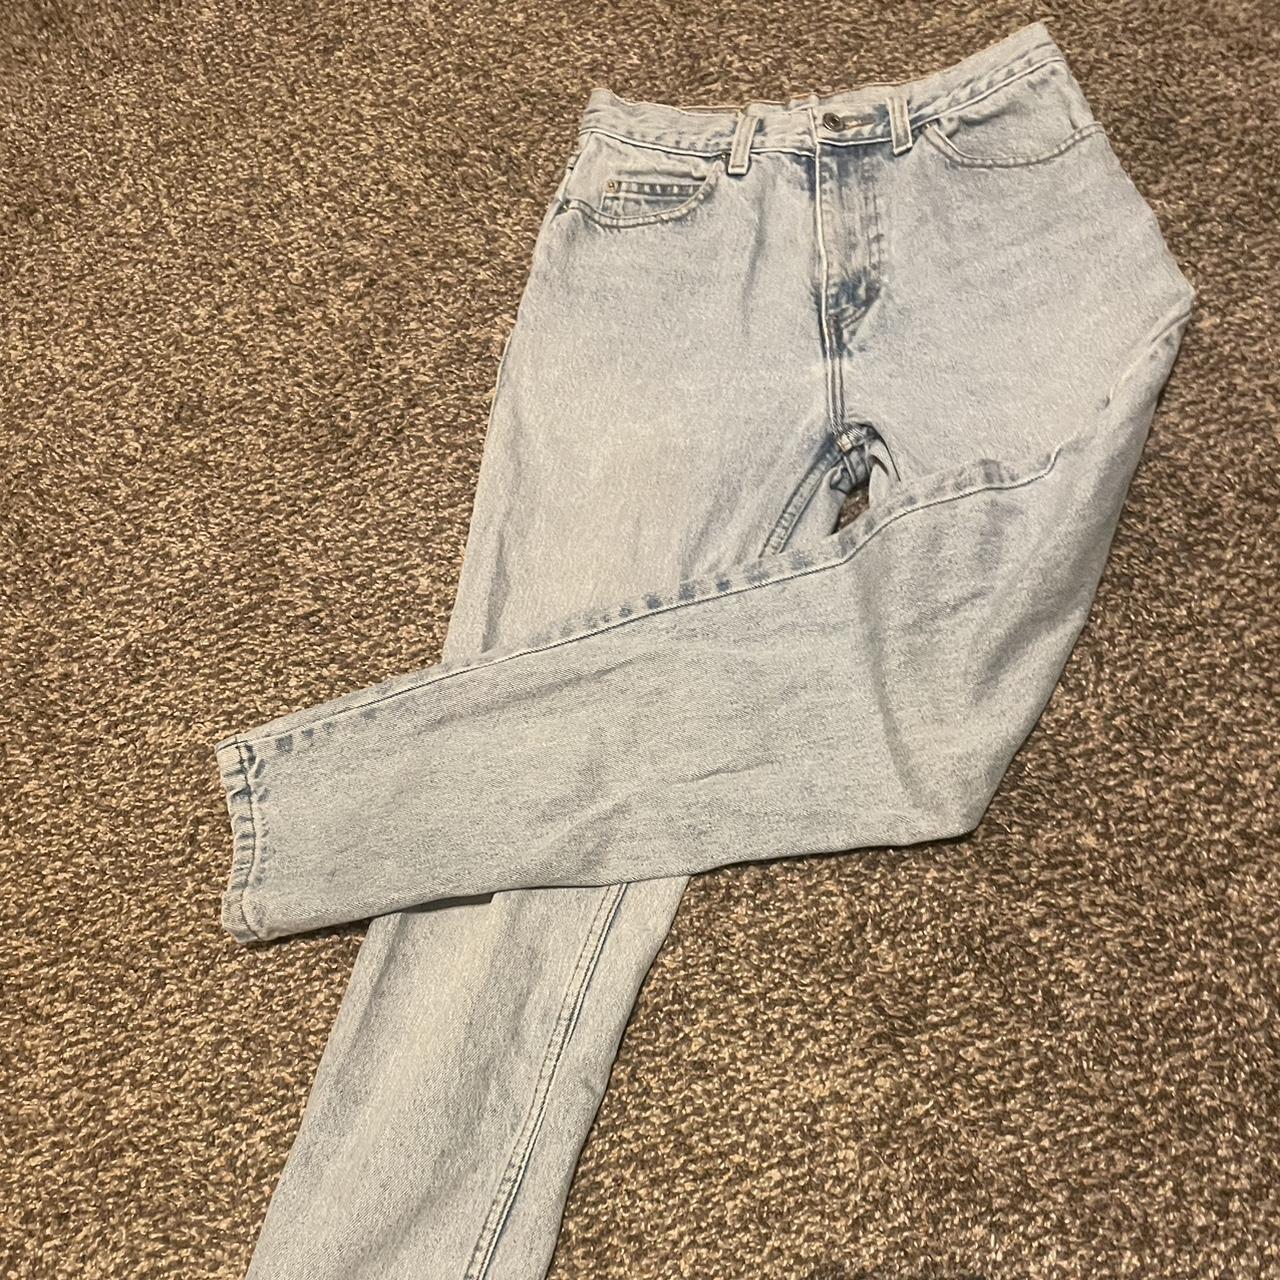 80s/90s Jordache Jeans High Rise, Faded, Naturally Distressed 